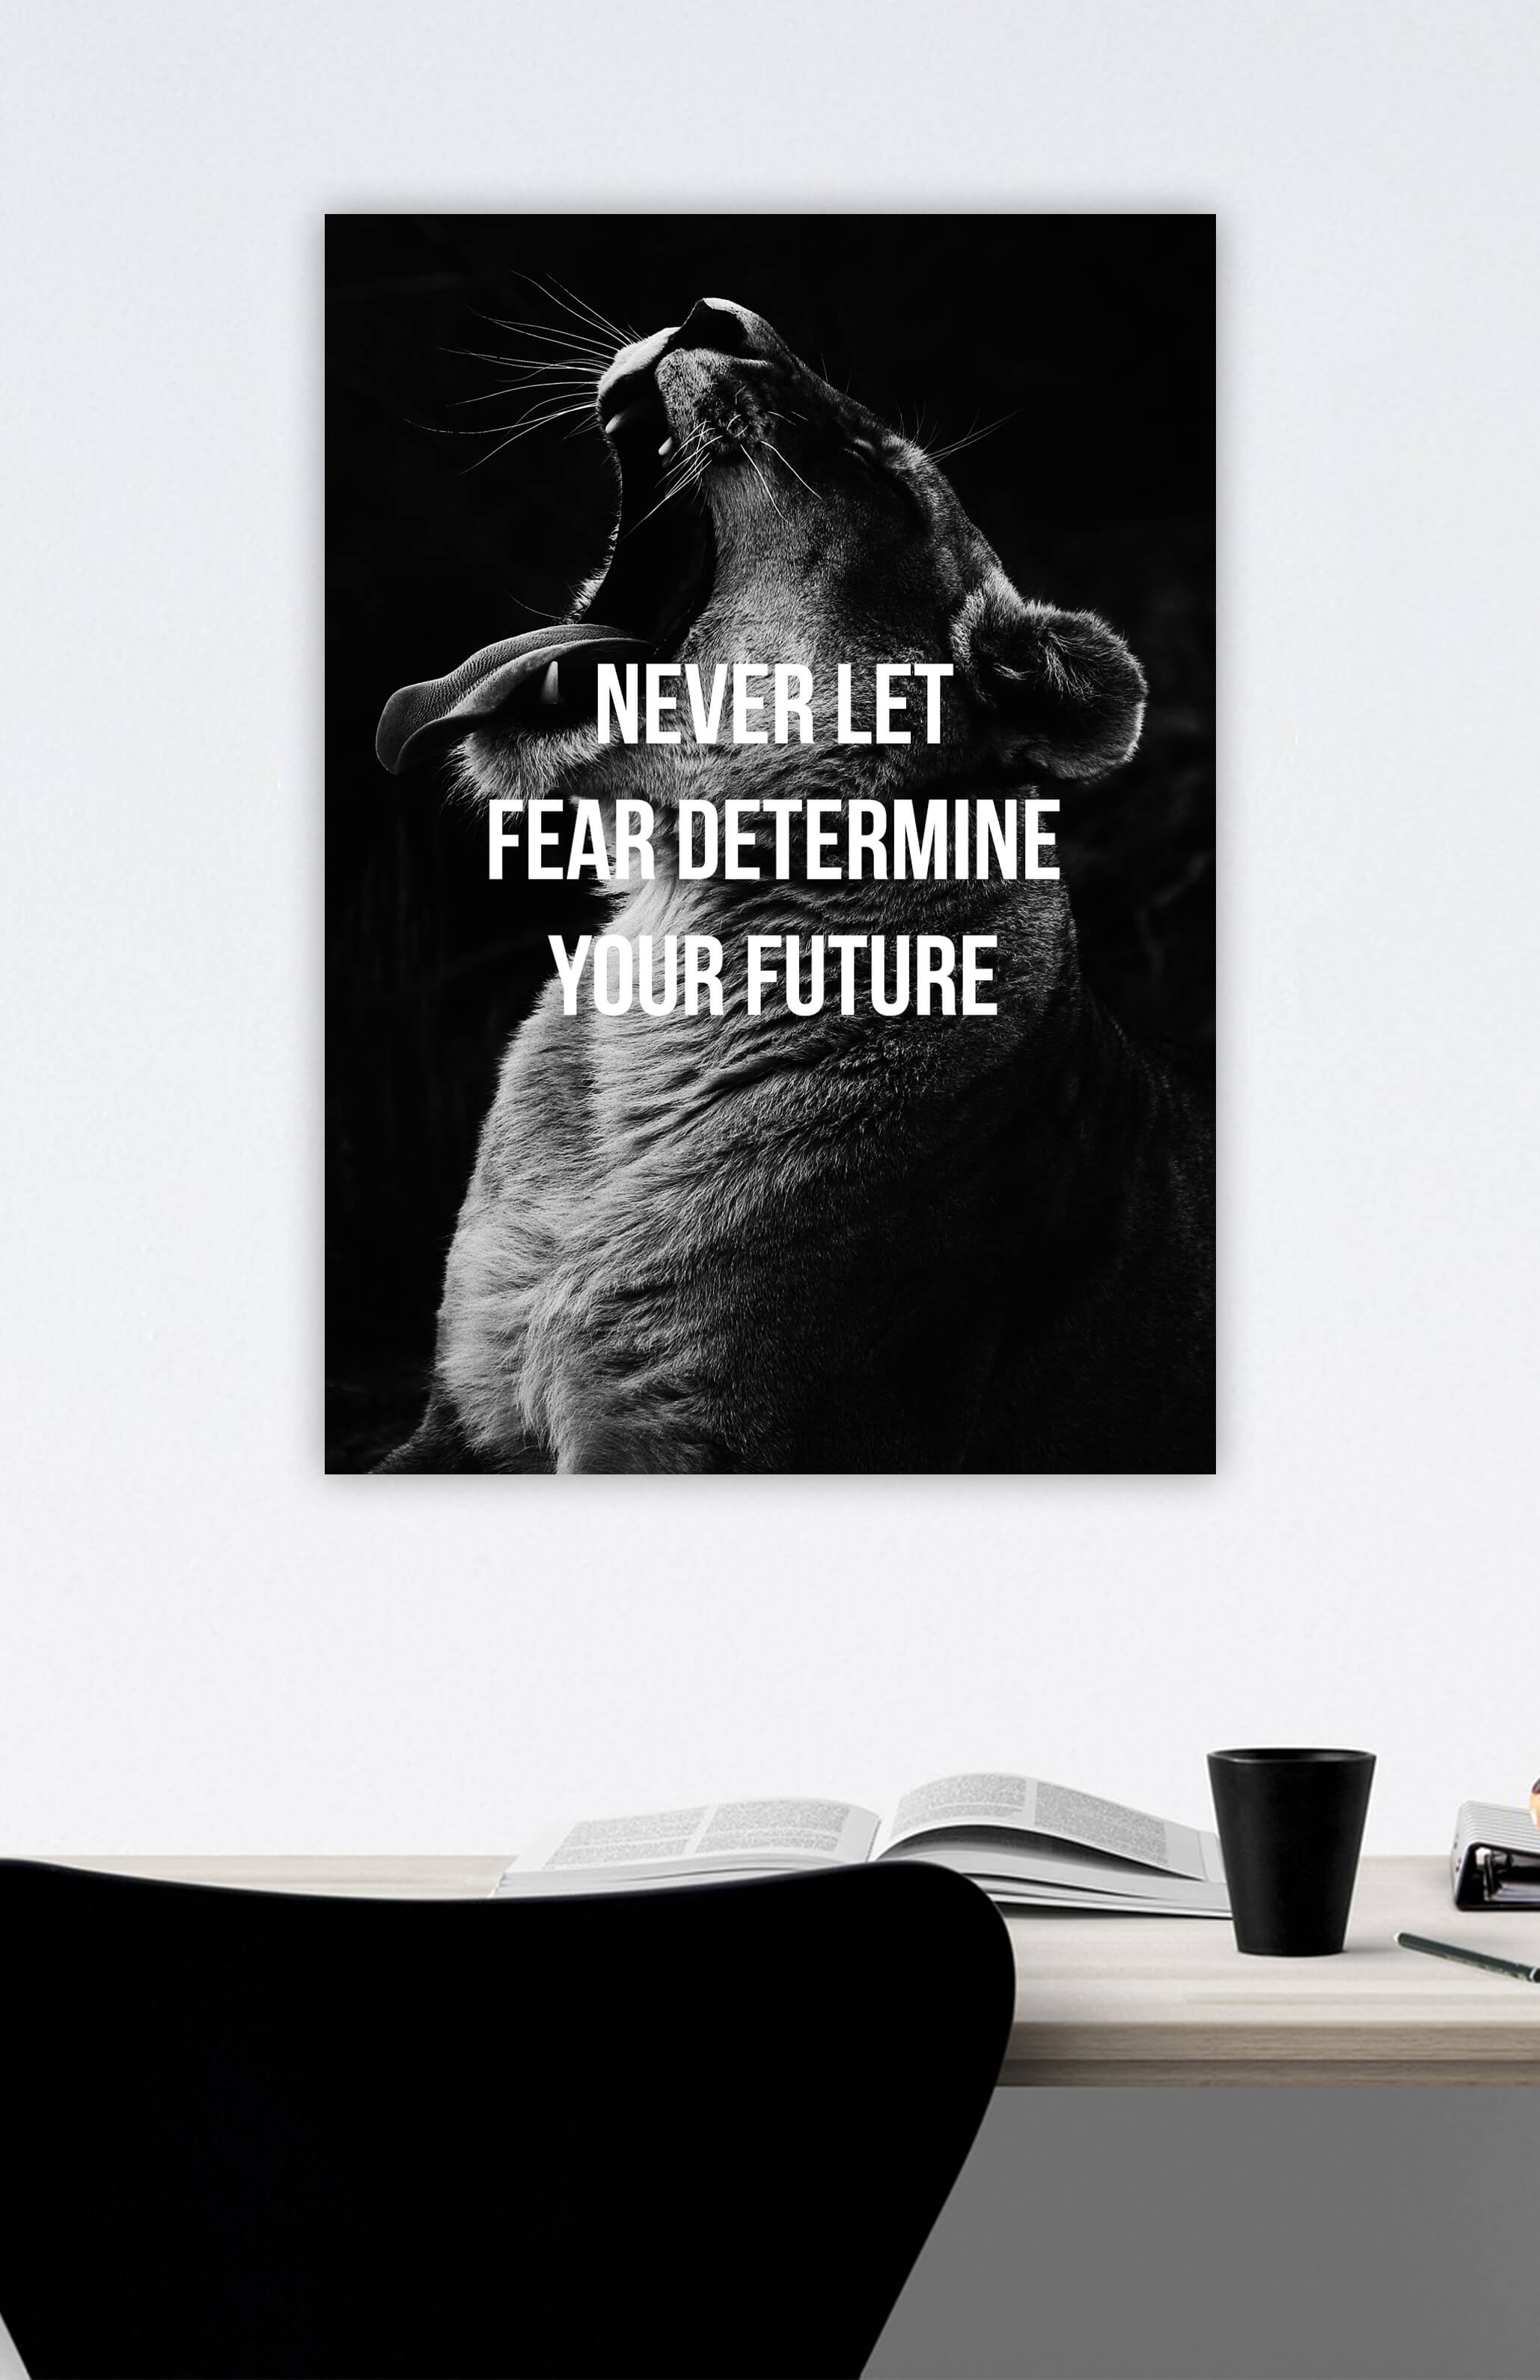 V3 Apparel womens Never Let Fear Determine Your Future, Motivational posters, mens inspirational wall artwork and empowering poster quote designs for office, home gym, school, kitchen and living room.